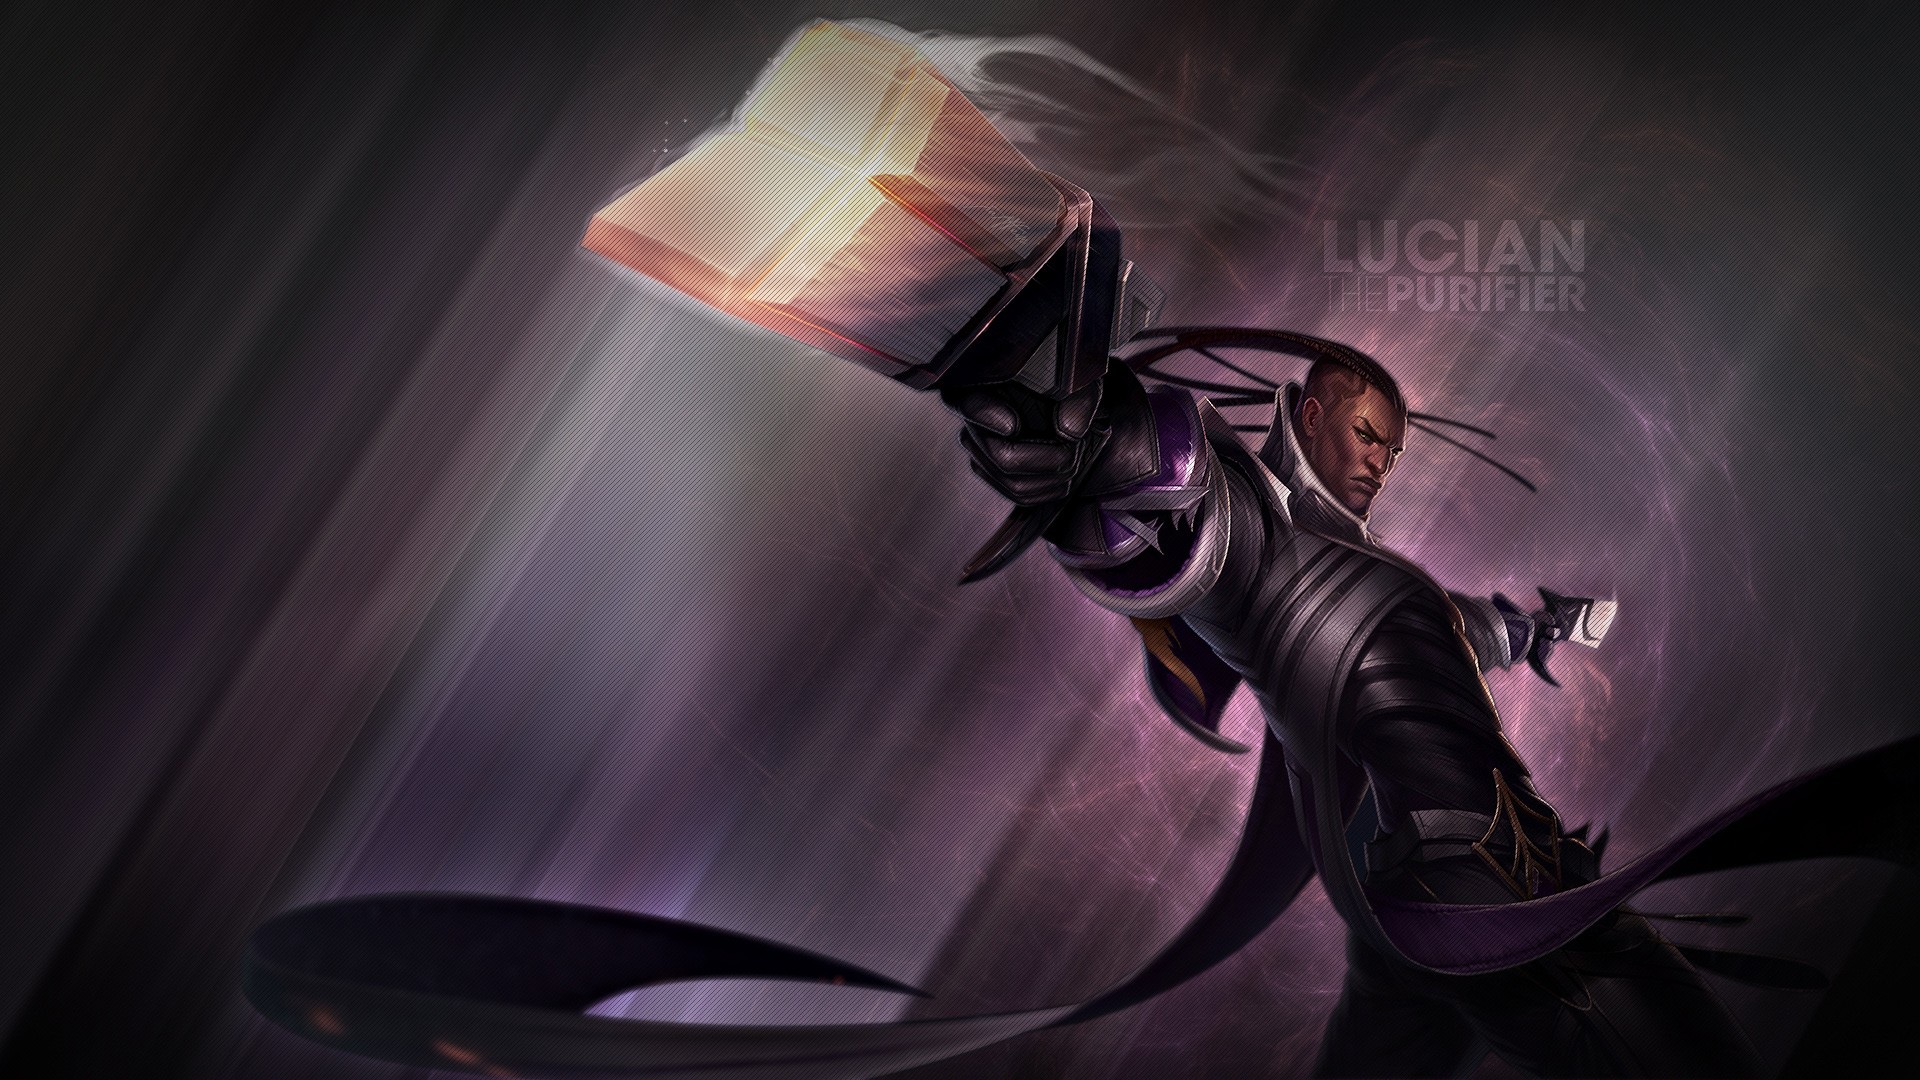 Lucian Wallpapers